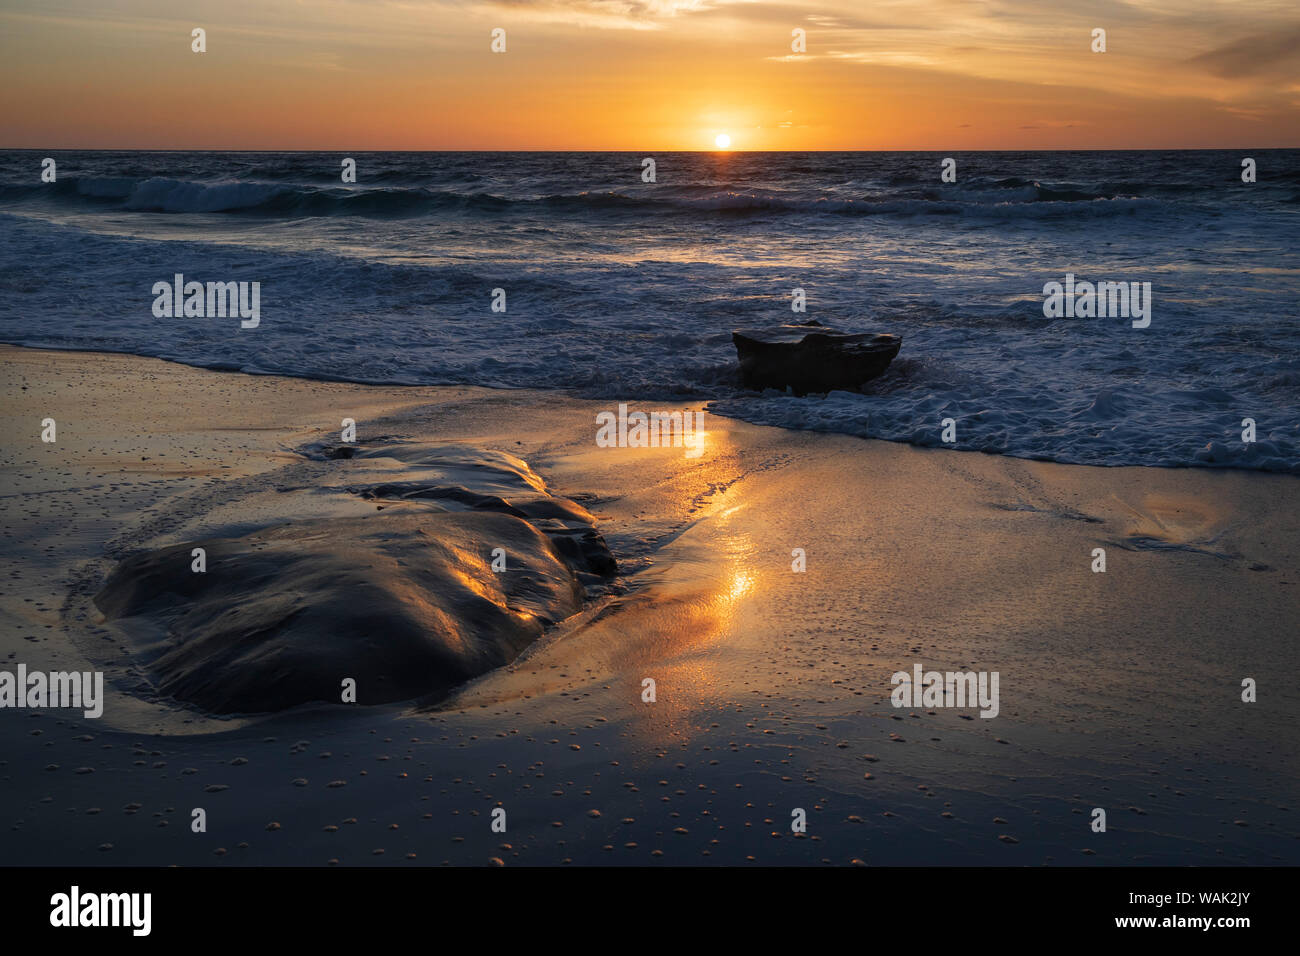 Sunset reflecting off the water on the sand of a beach Stock Photo